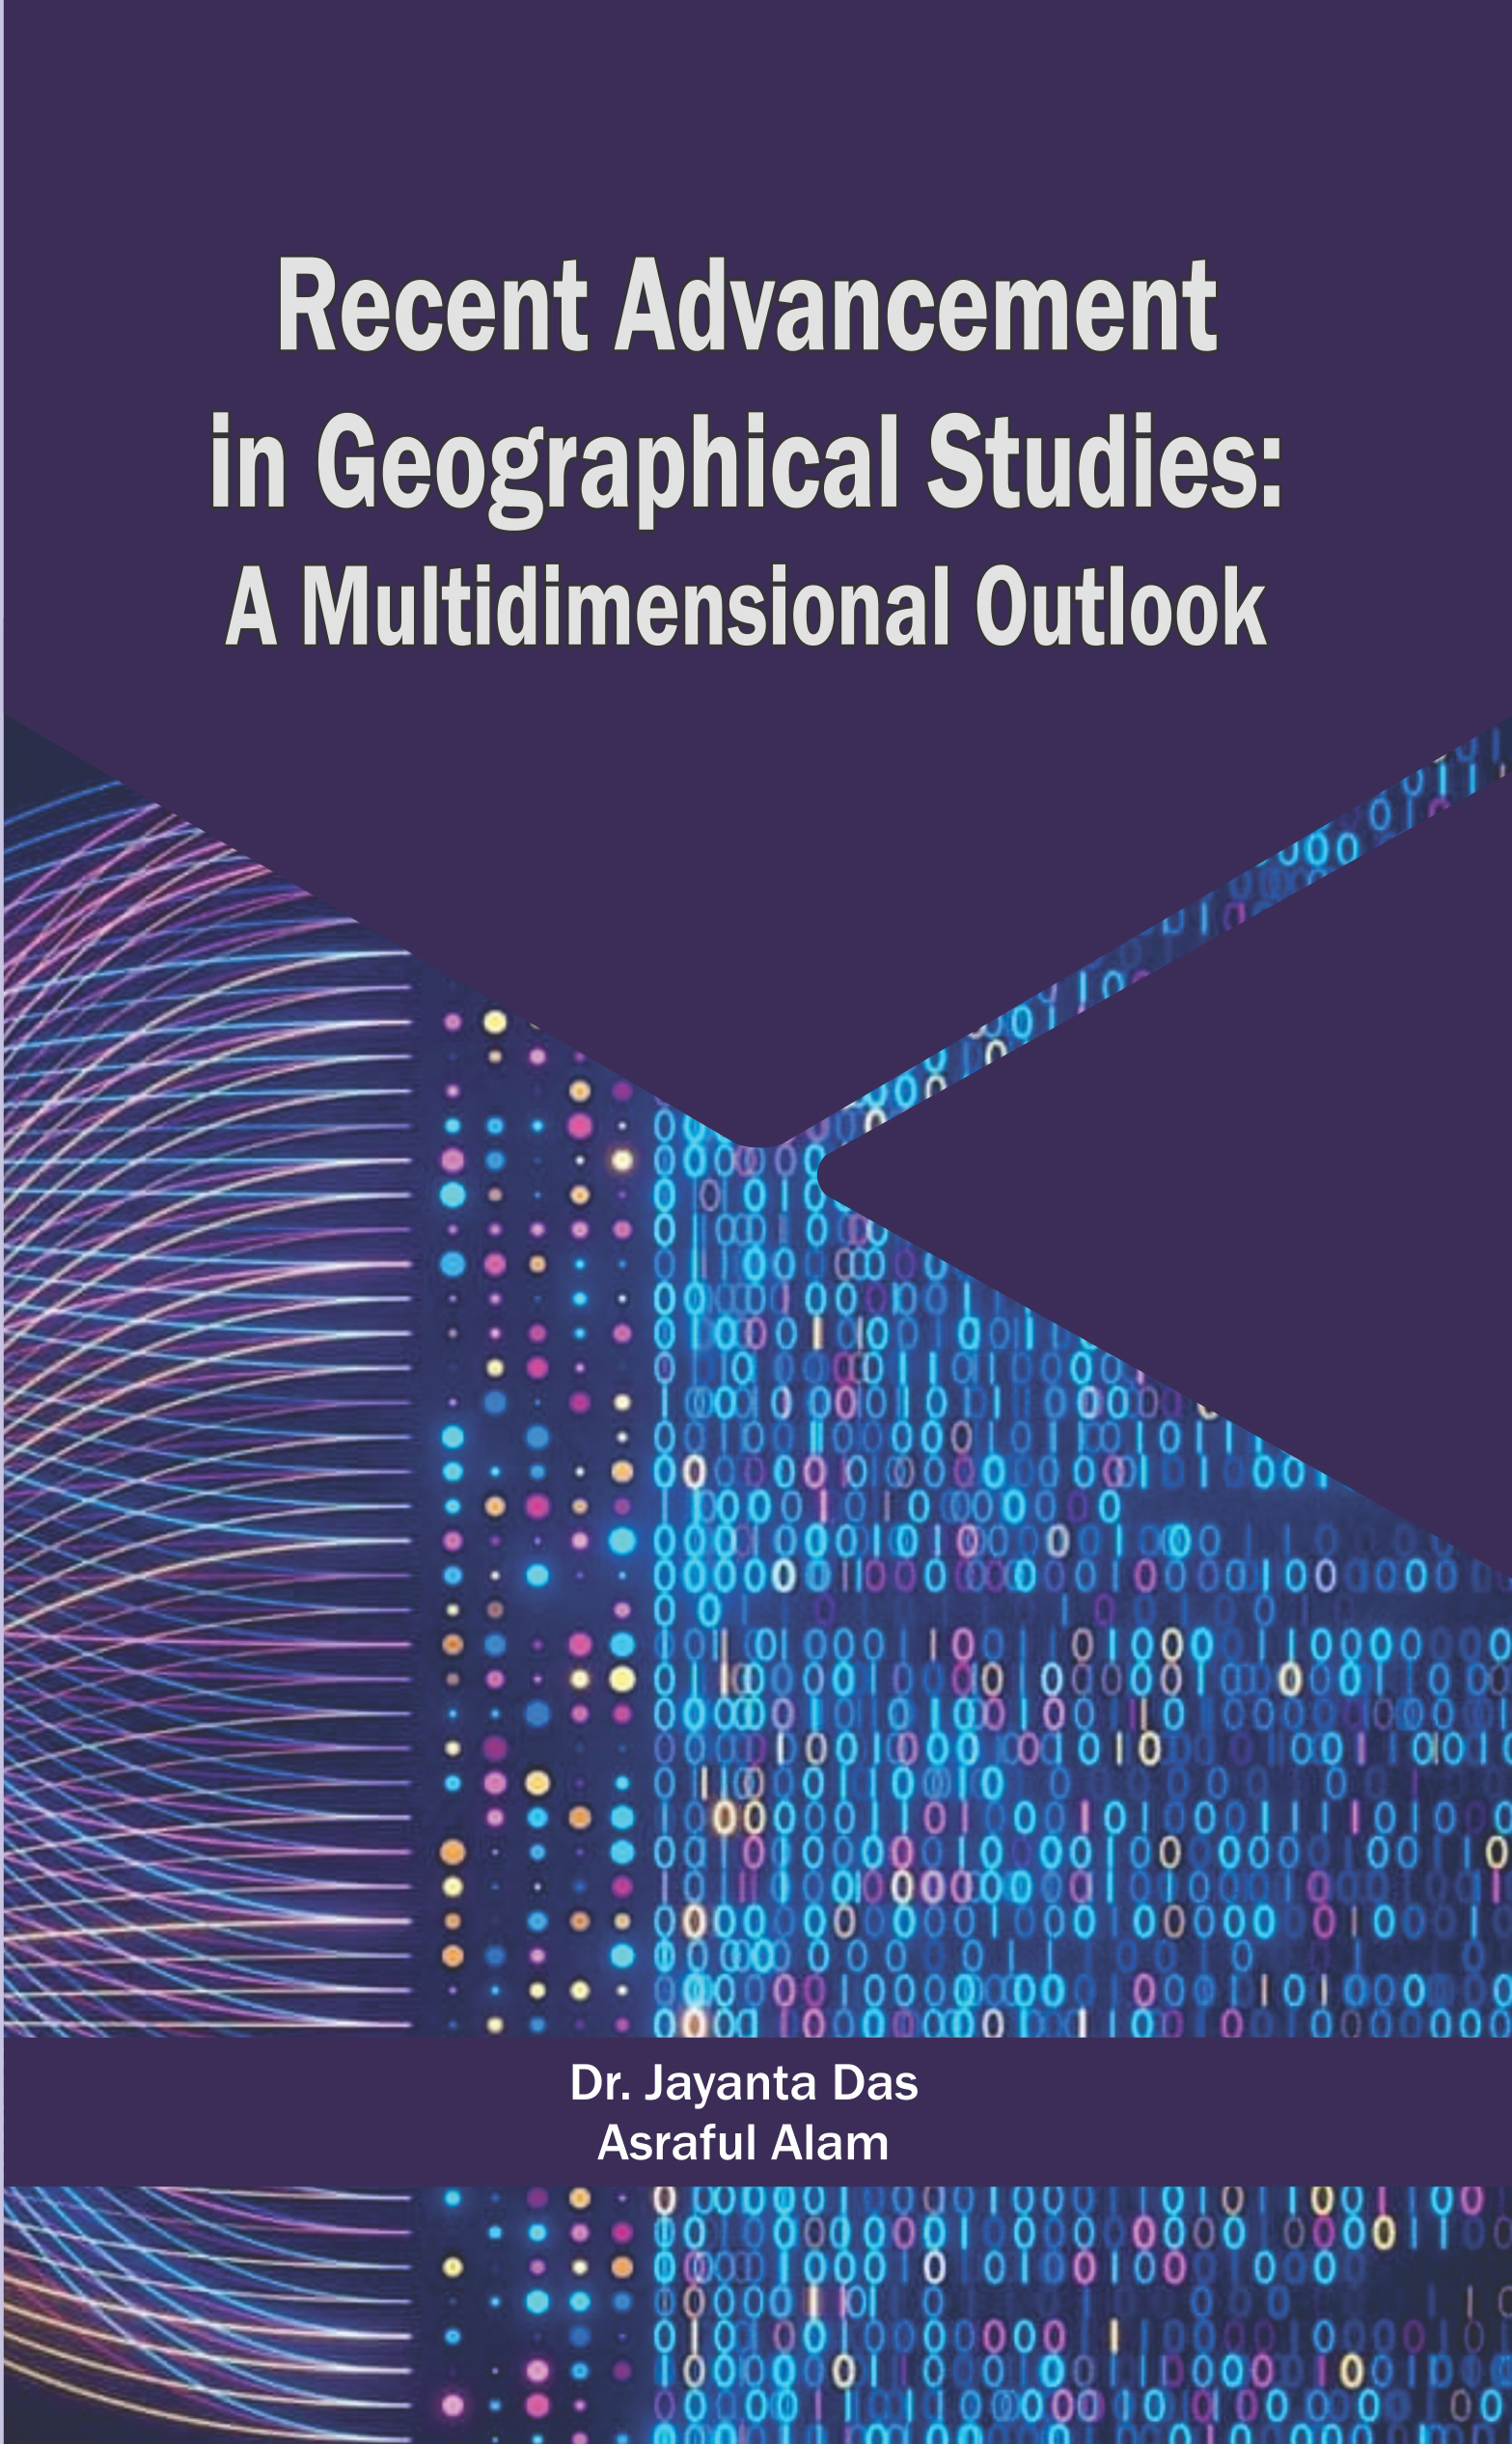 Recent Advancement in Geographical Studies: A Multidimensional Outlook